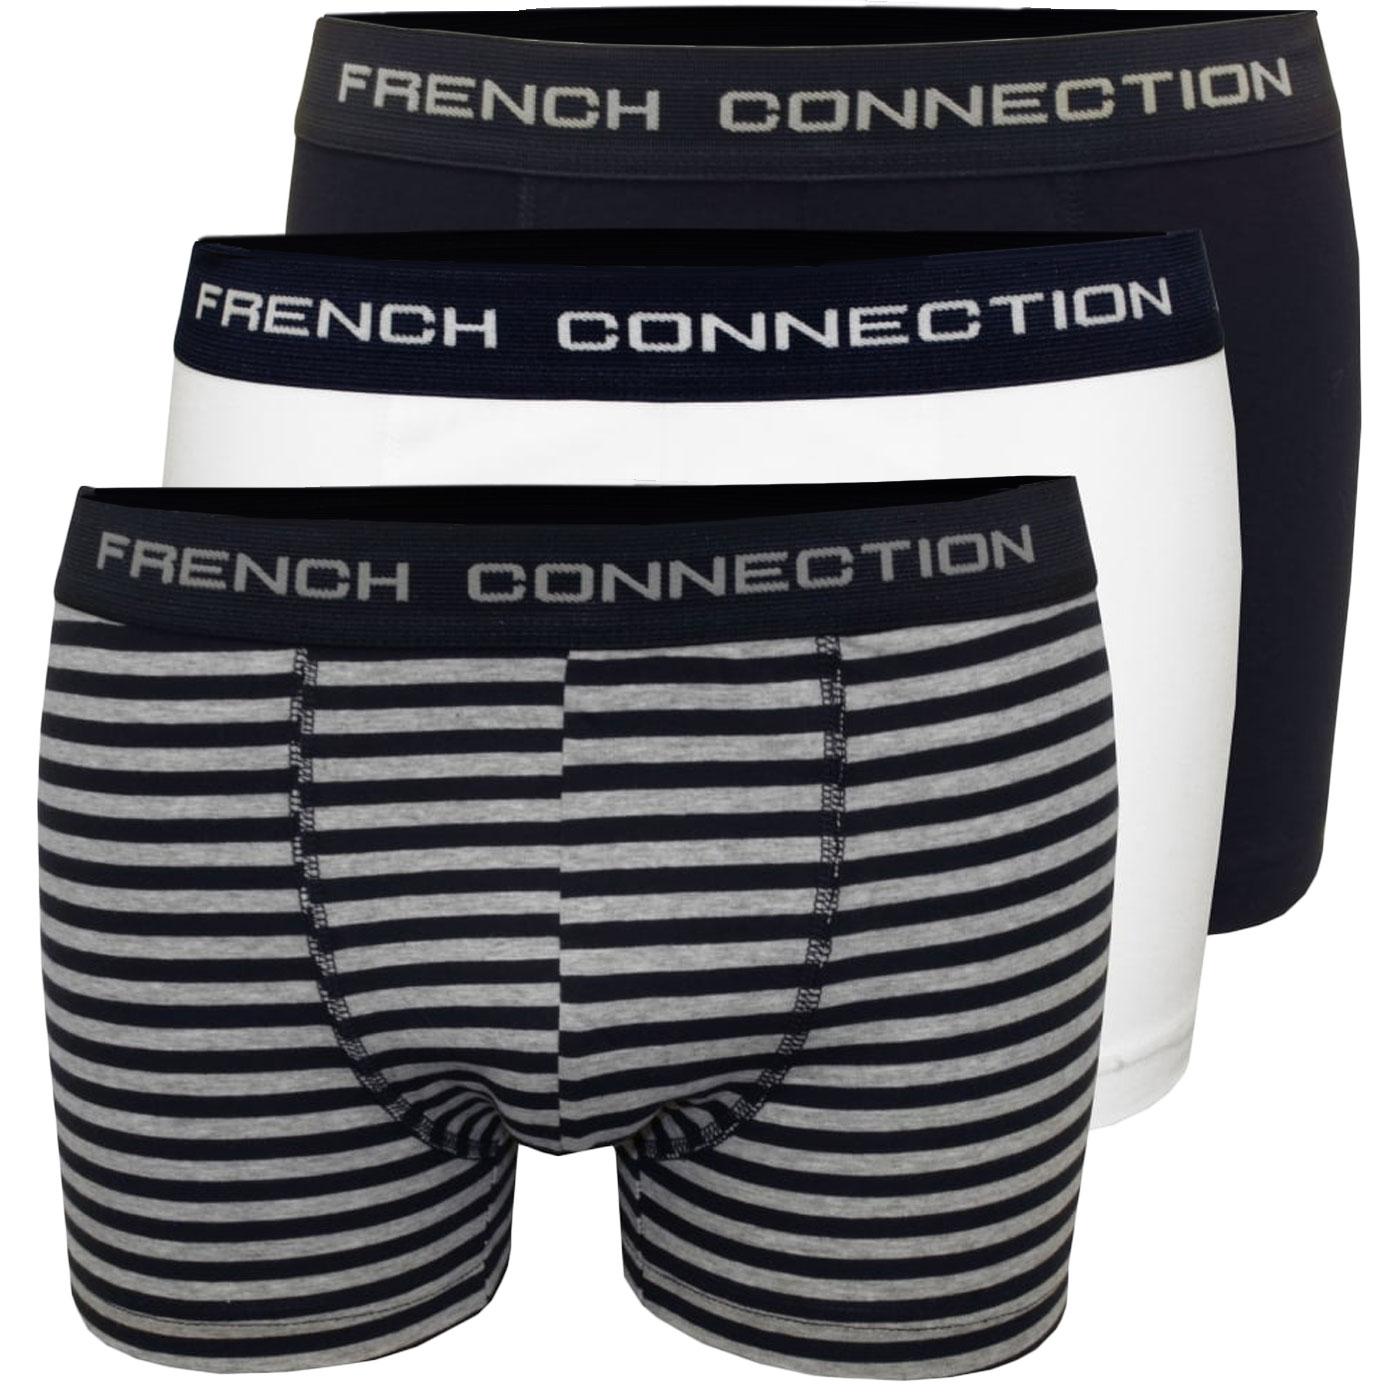 + FRENCH CONNECTION 3 Pack Boxer Shorts W/M/Stripe